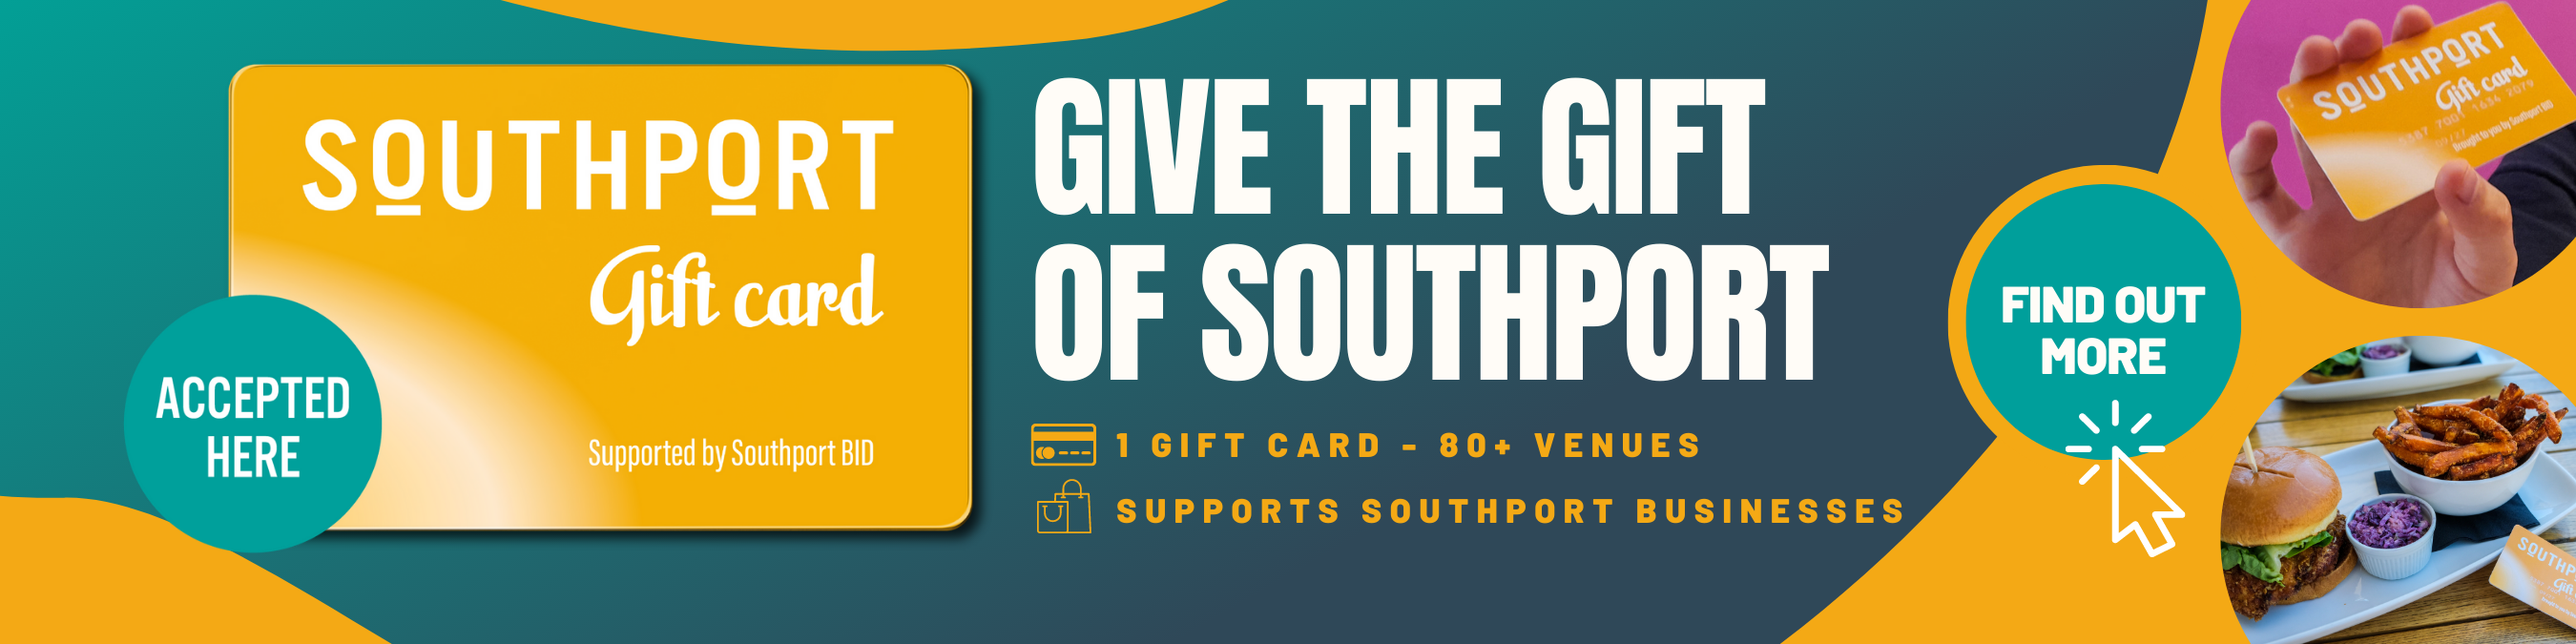 Southport Gift Card makes the perfect present for Father's Day